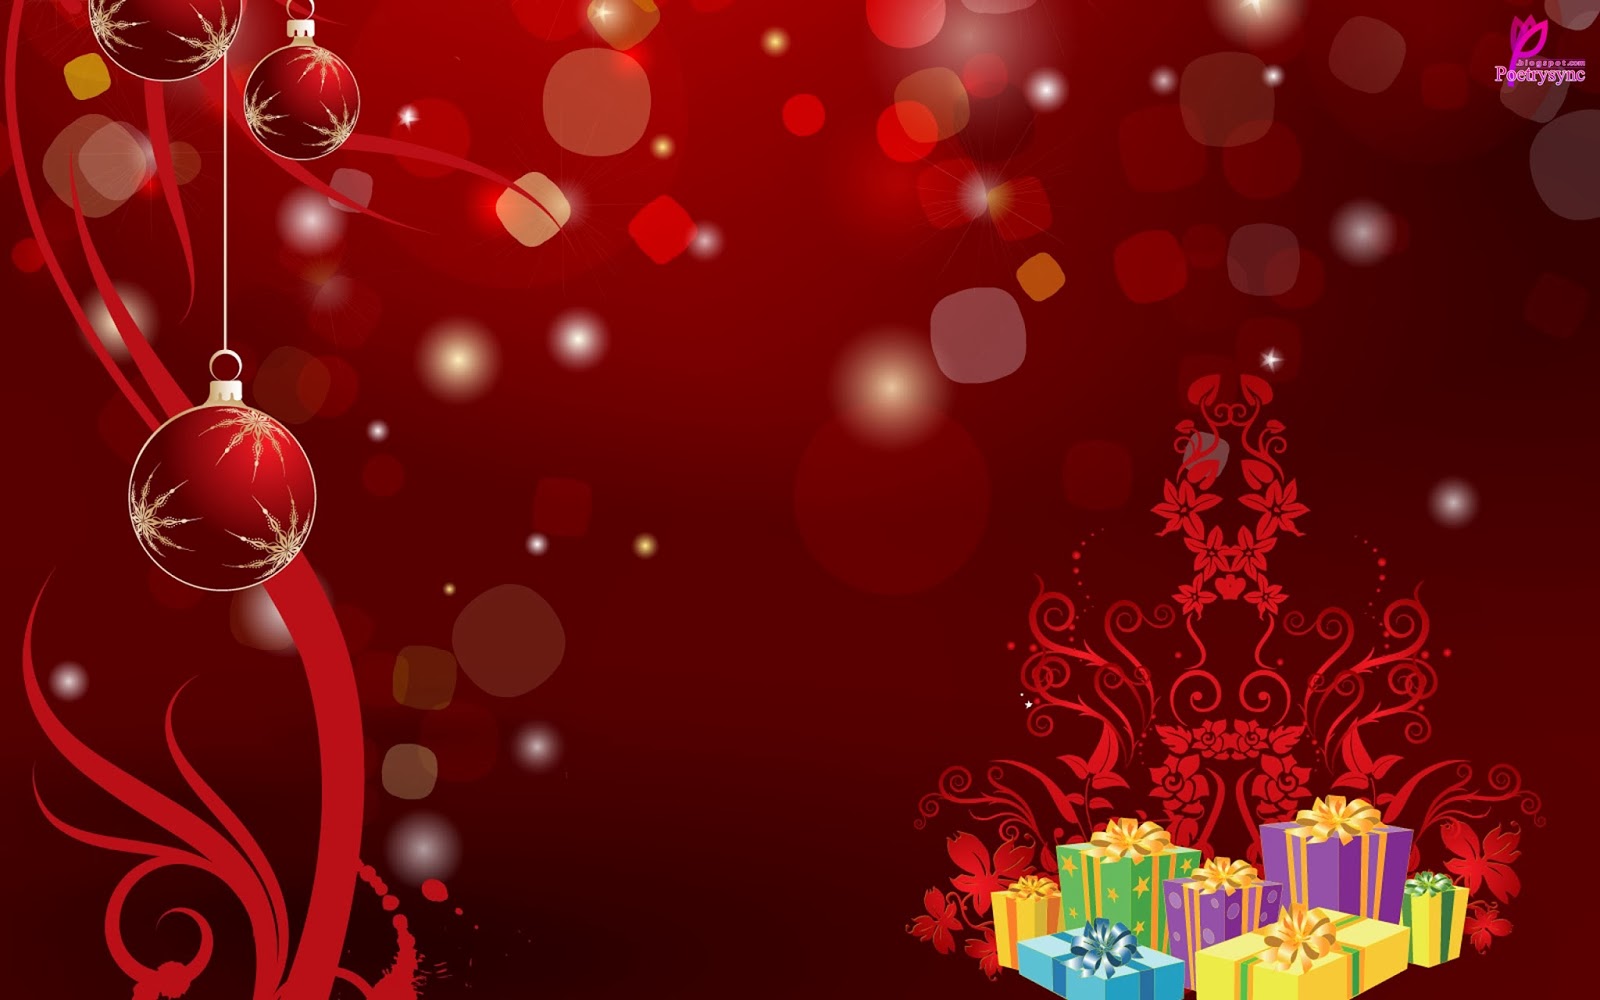 Gallery For Gt HD Red Christmas Background